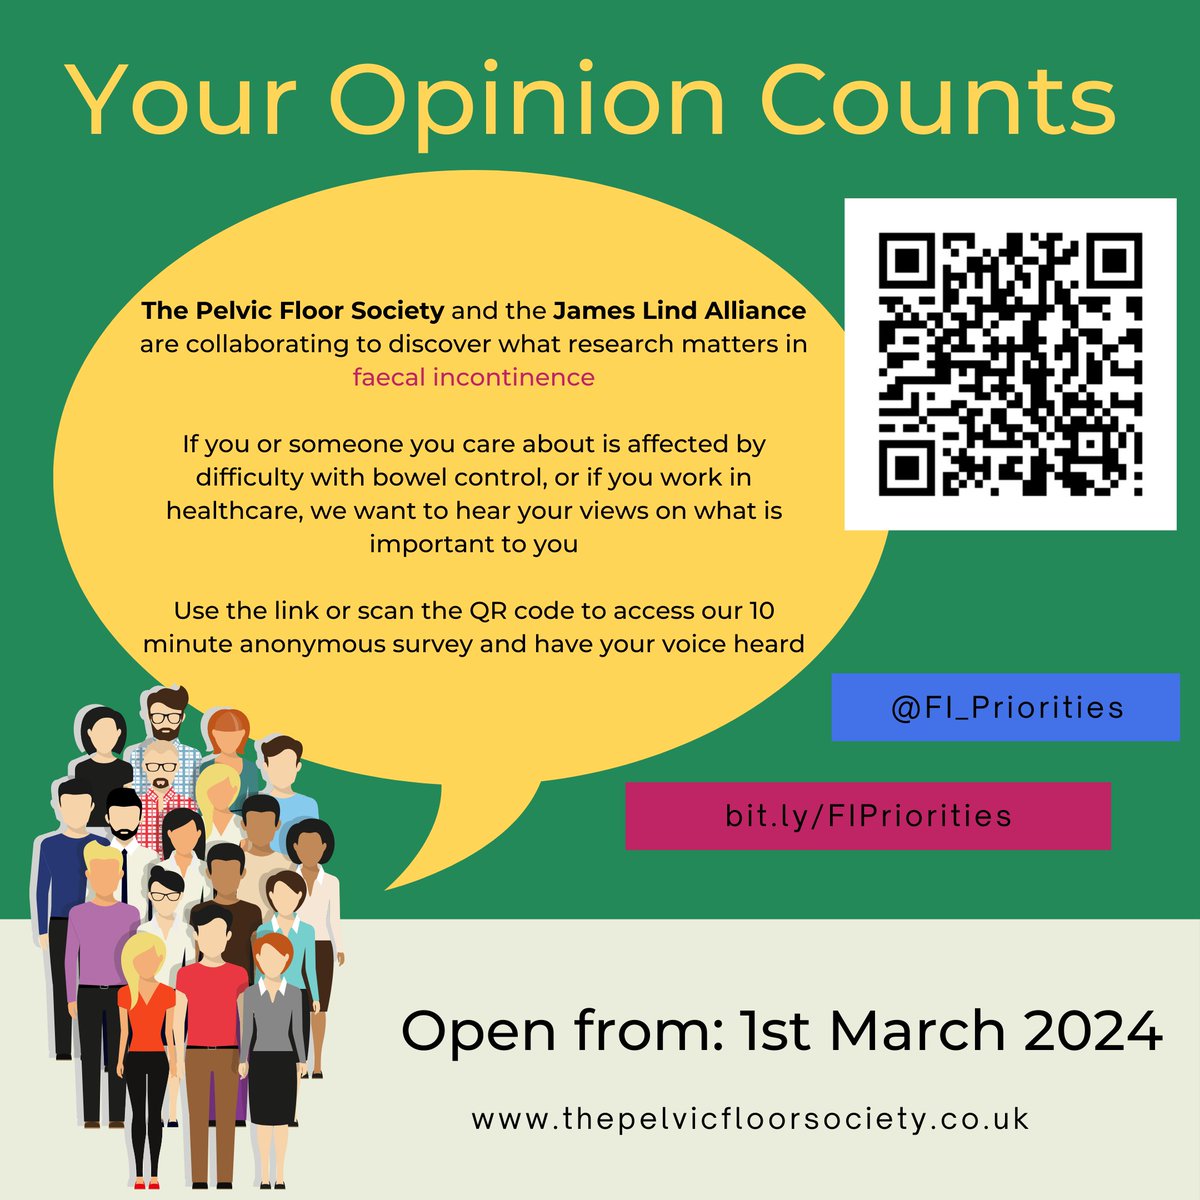 📣 REMINDER - Closing 12th April Help to influence the future of research into faecal incontinence in the UK. Tell us the questions you want answered in the @FI_Priorities survey with @LindAlliance here: bit.ly/FIPriorities #FIResearchPriorities